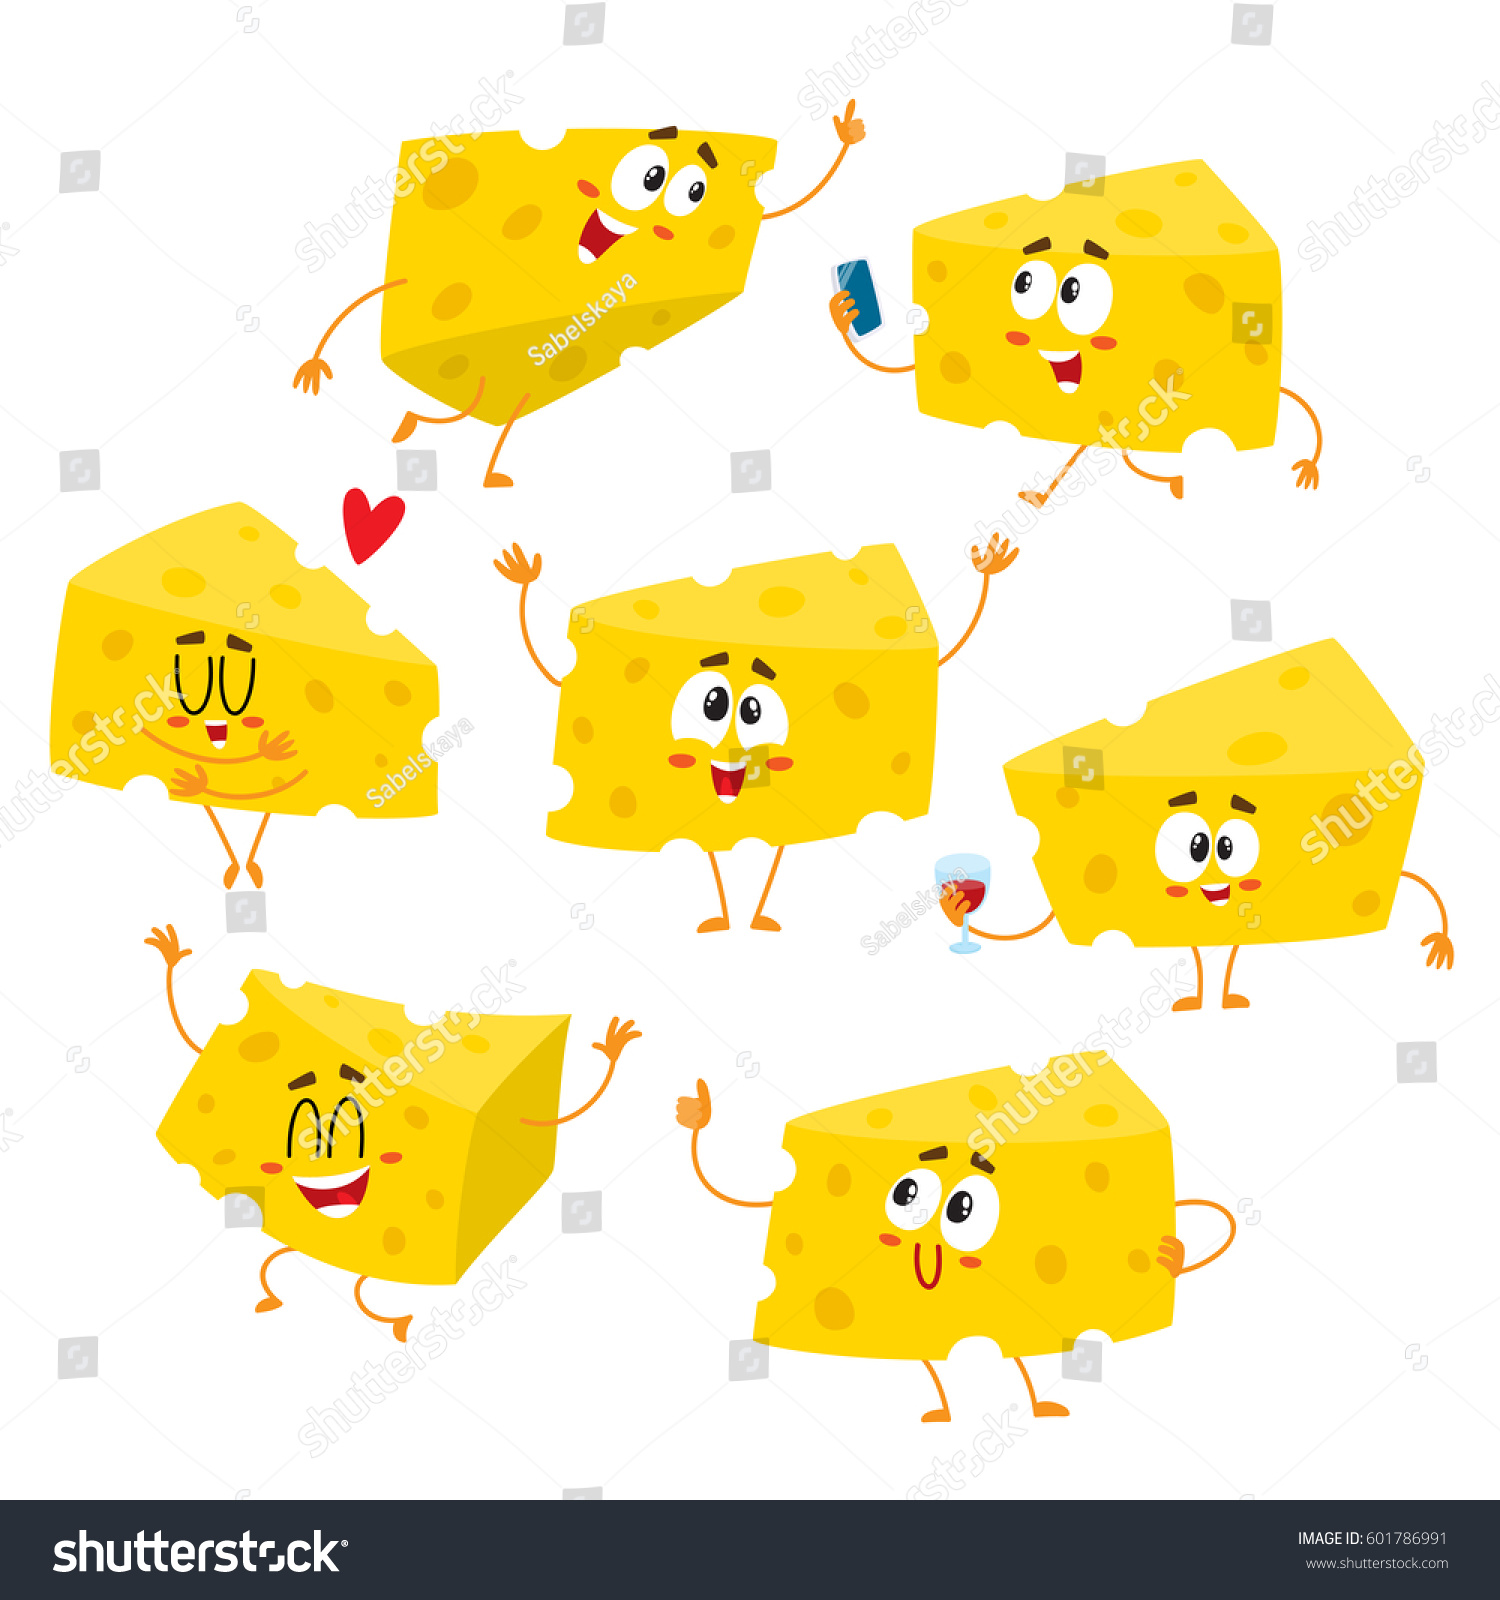 SVG of Set of cute and funny cheese chunk character showing different emotions, cartoon vector illustration isolated on white background.  svg